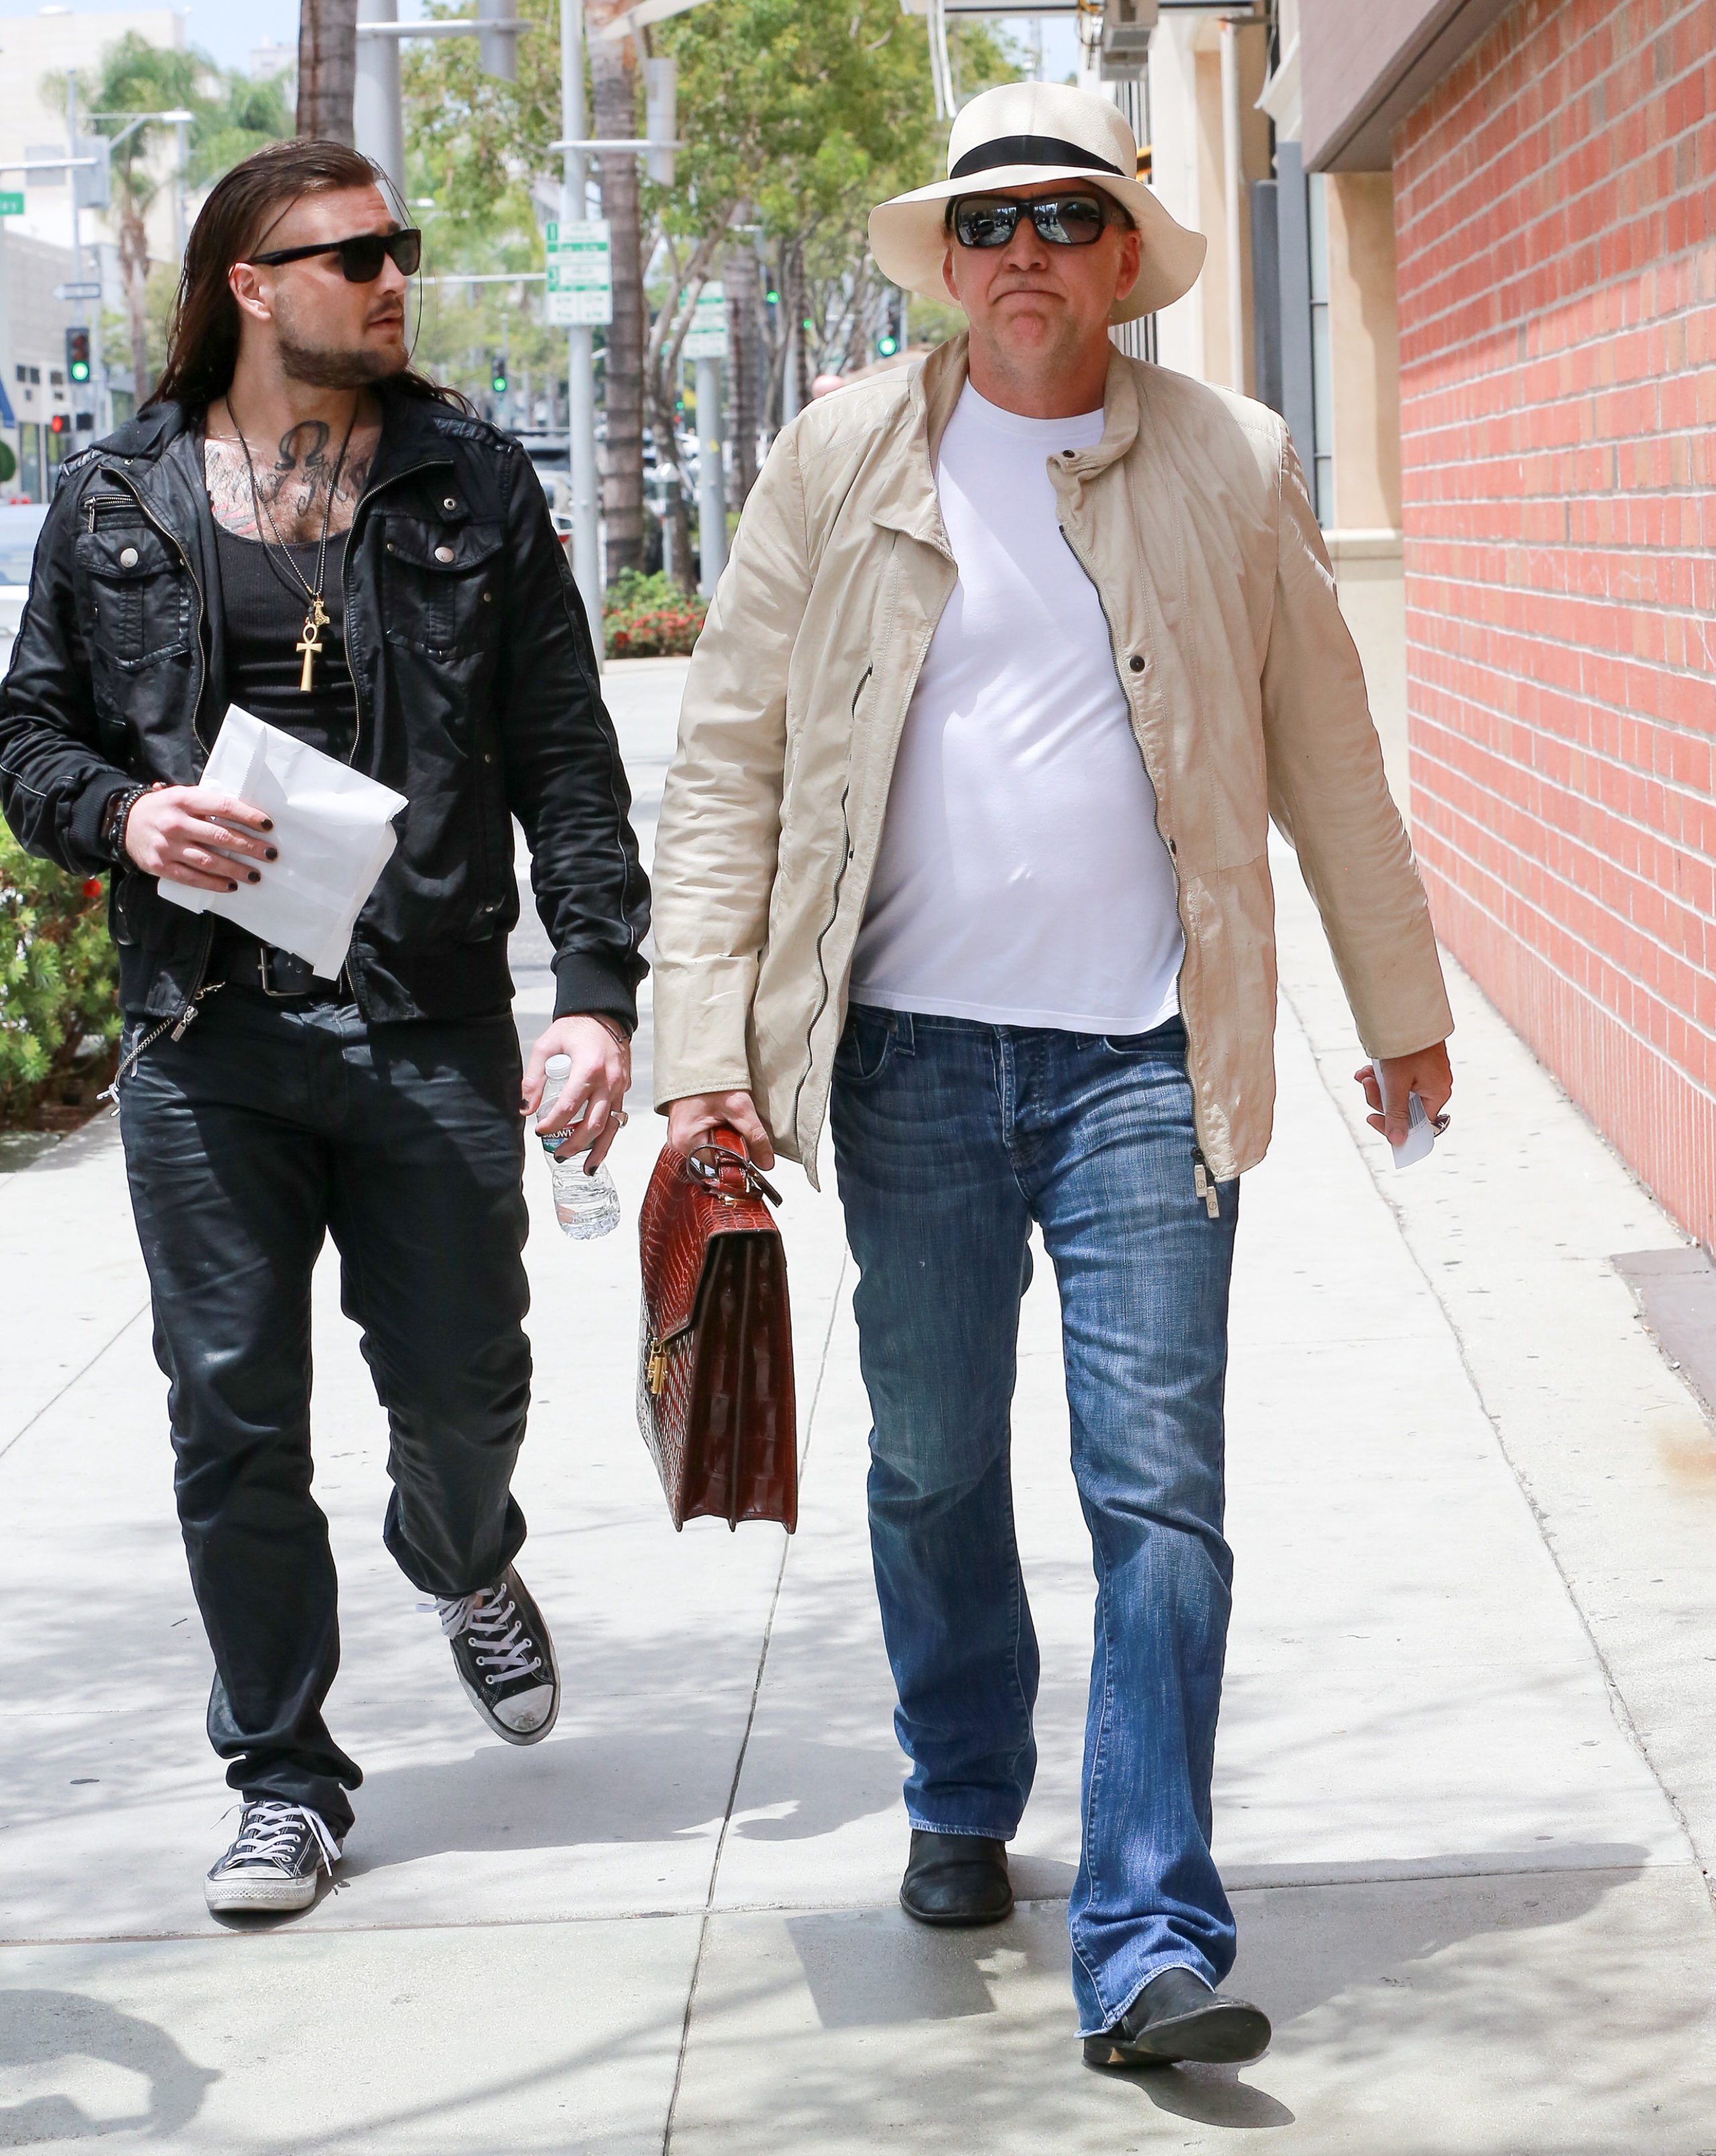 LOS ANGELES, CA - AUGUST 03: Weston Cage and Nicolas Cage are seen on August 03, 2015 in Los Angeles, California. (Photo by Bauer-Griffin/GC Images) Getty Images